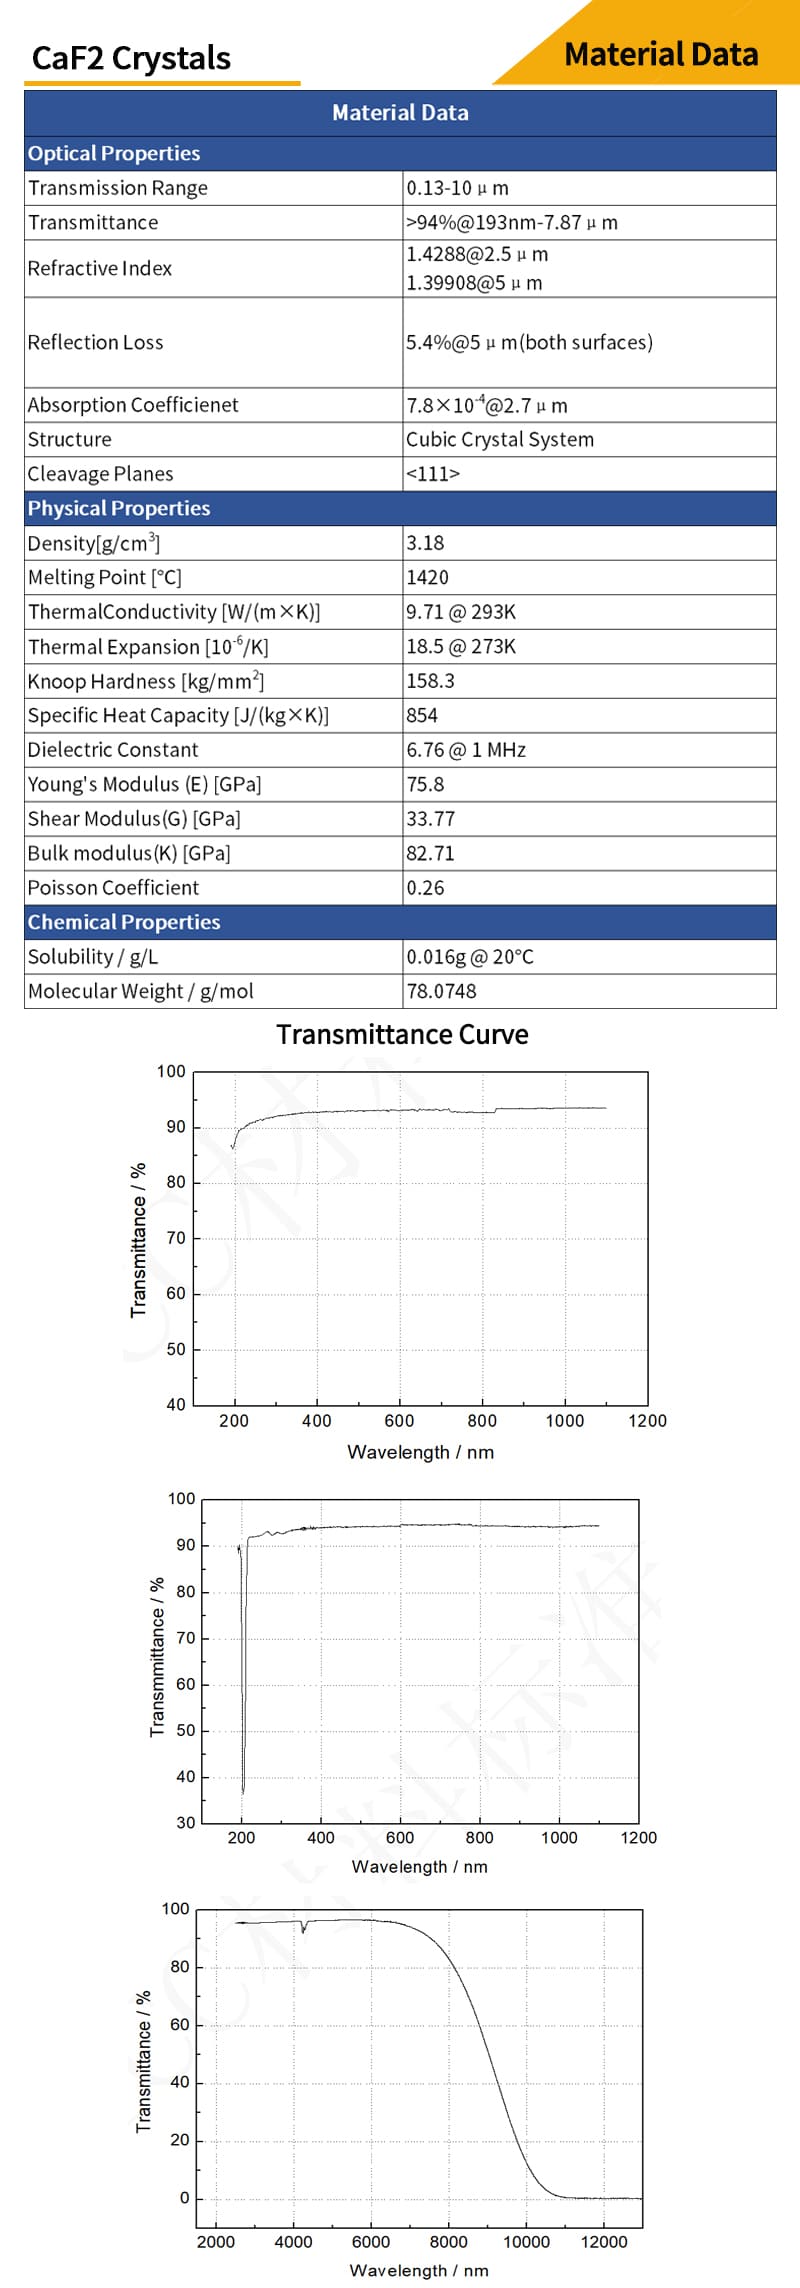 Material data and transmittance curves for calcium fluoride round windows